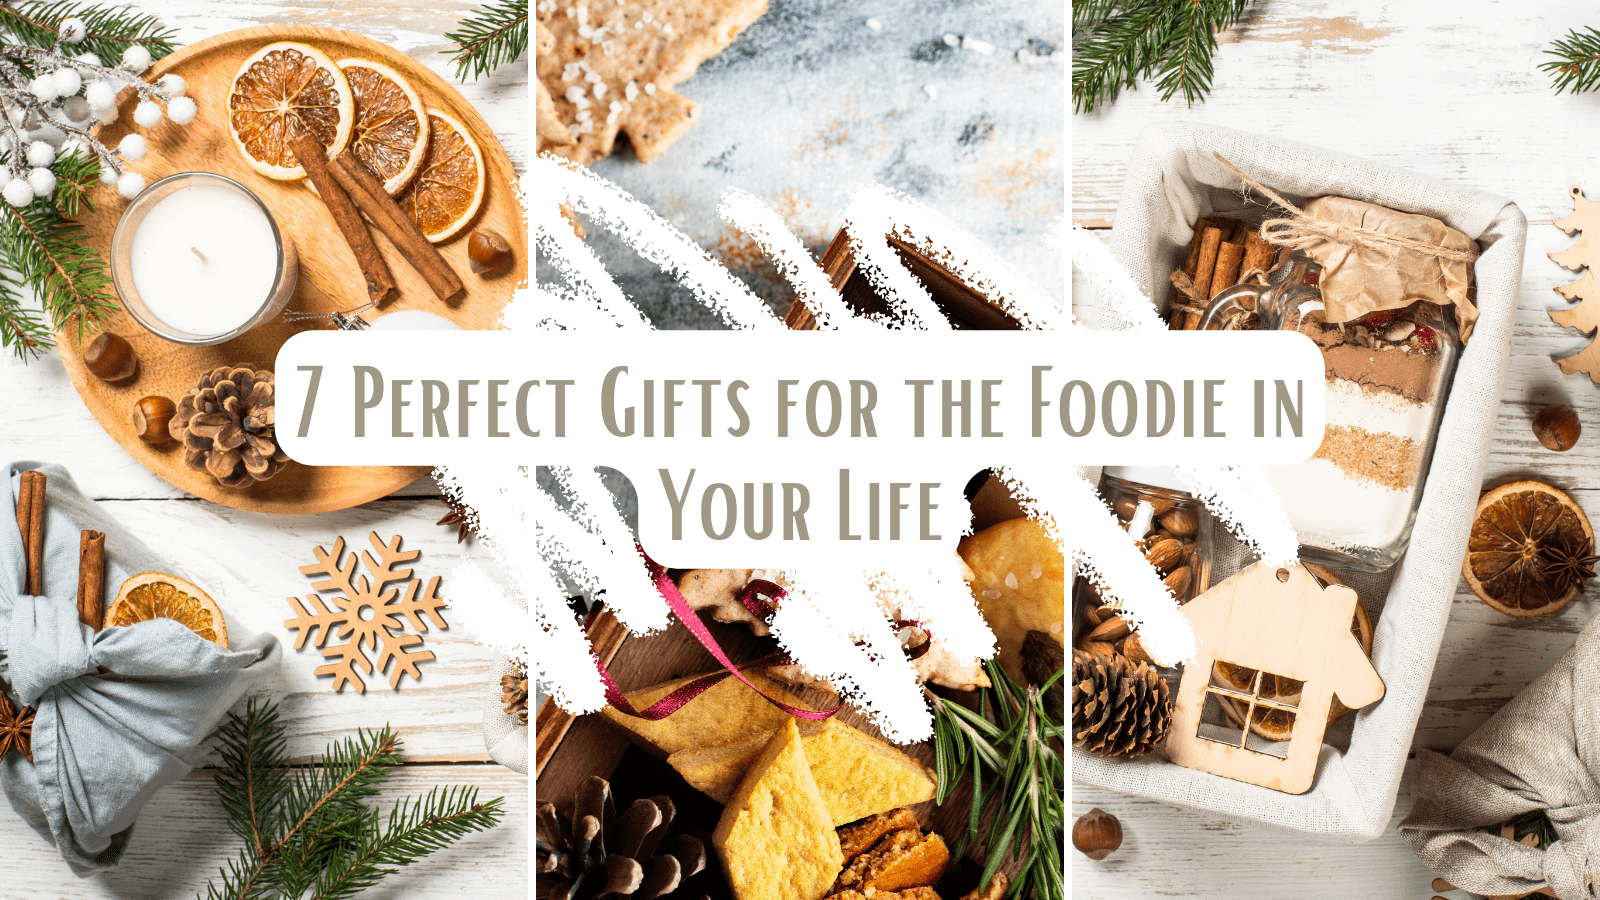 7 Perfect Gifts for the Foodie in Your Life